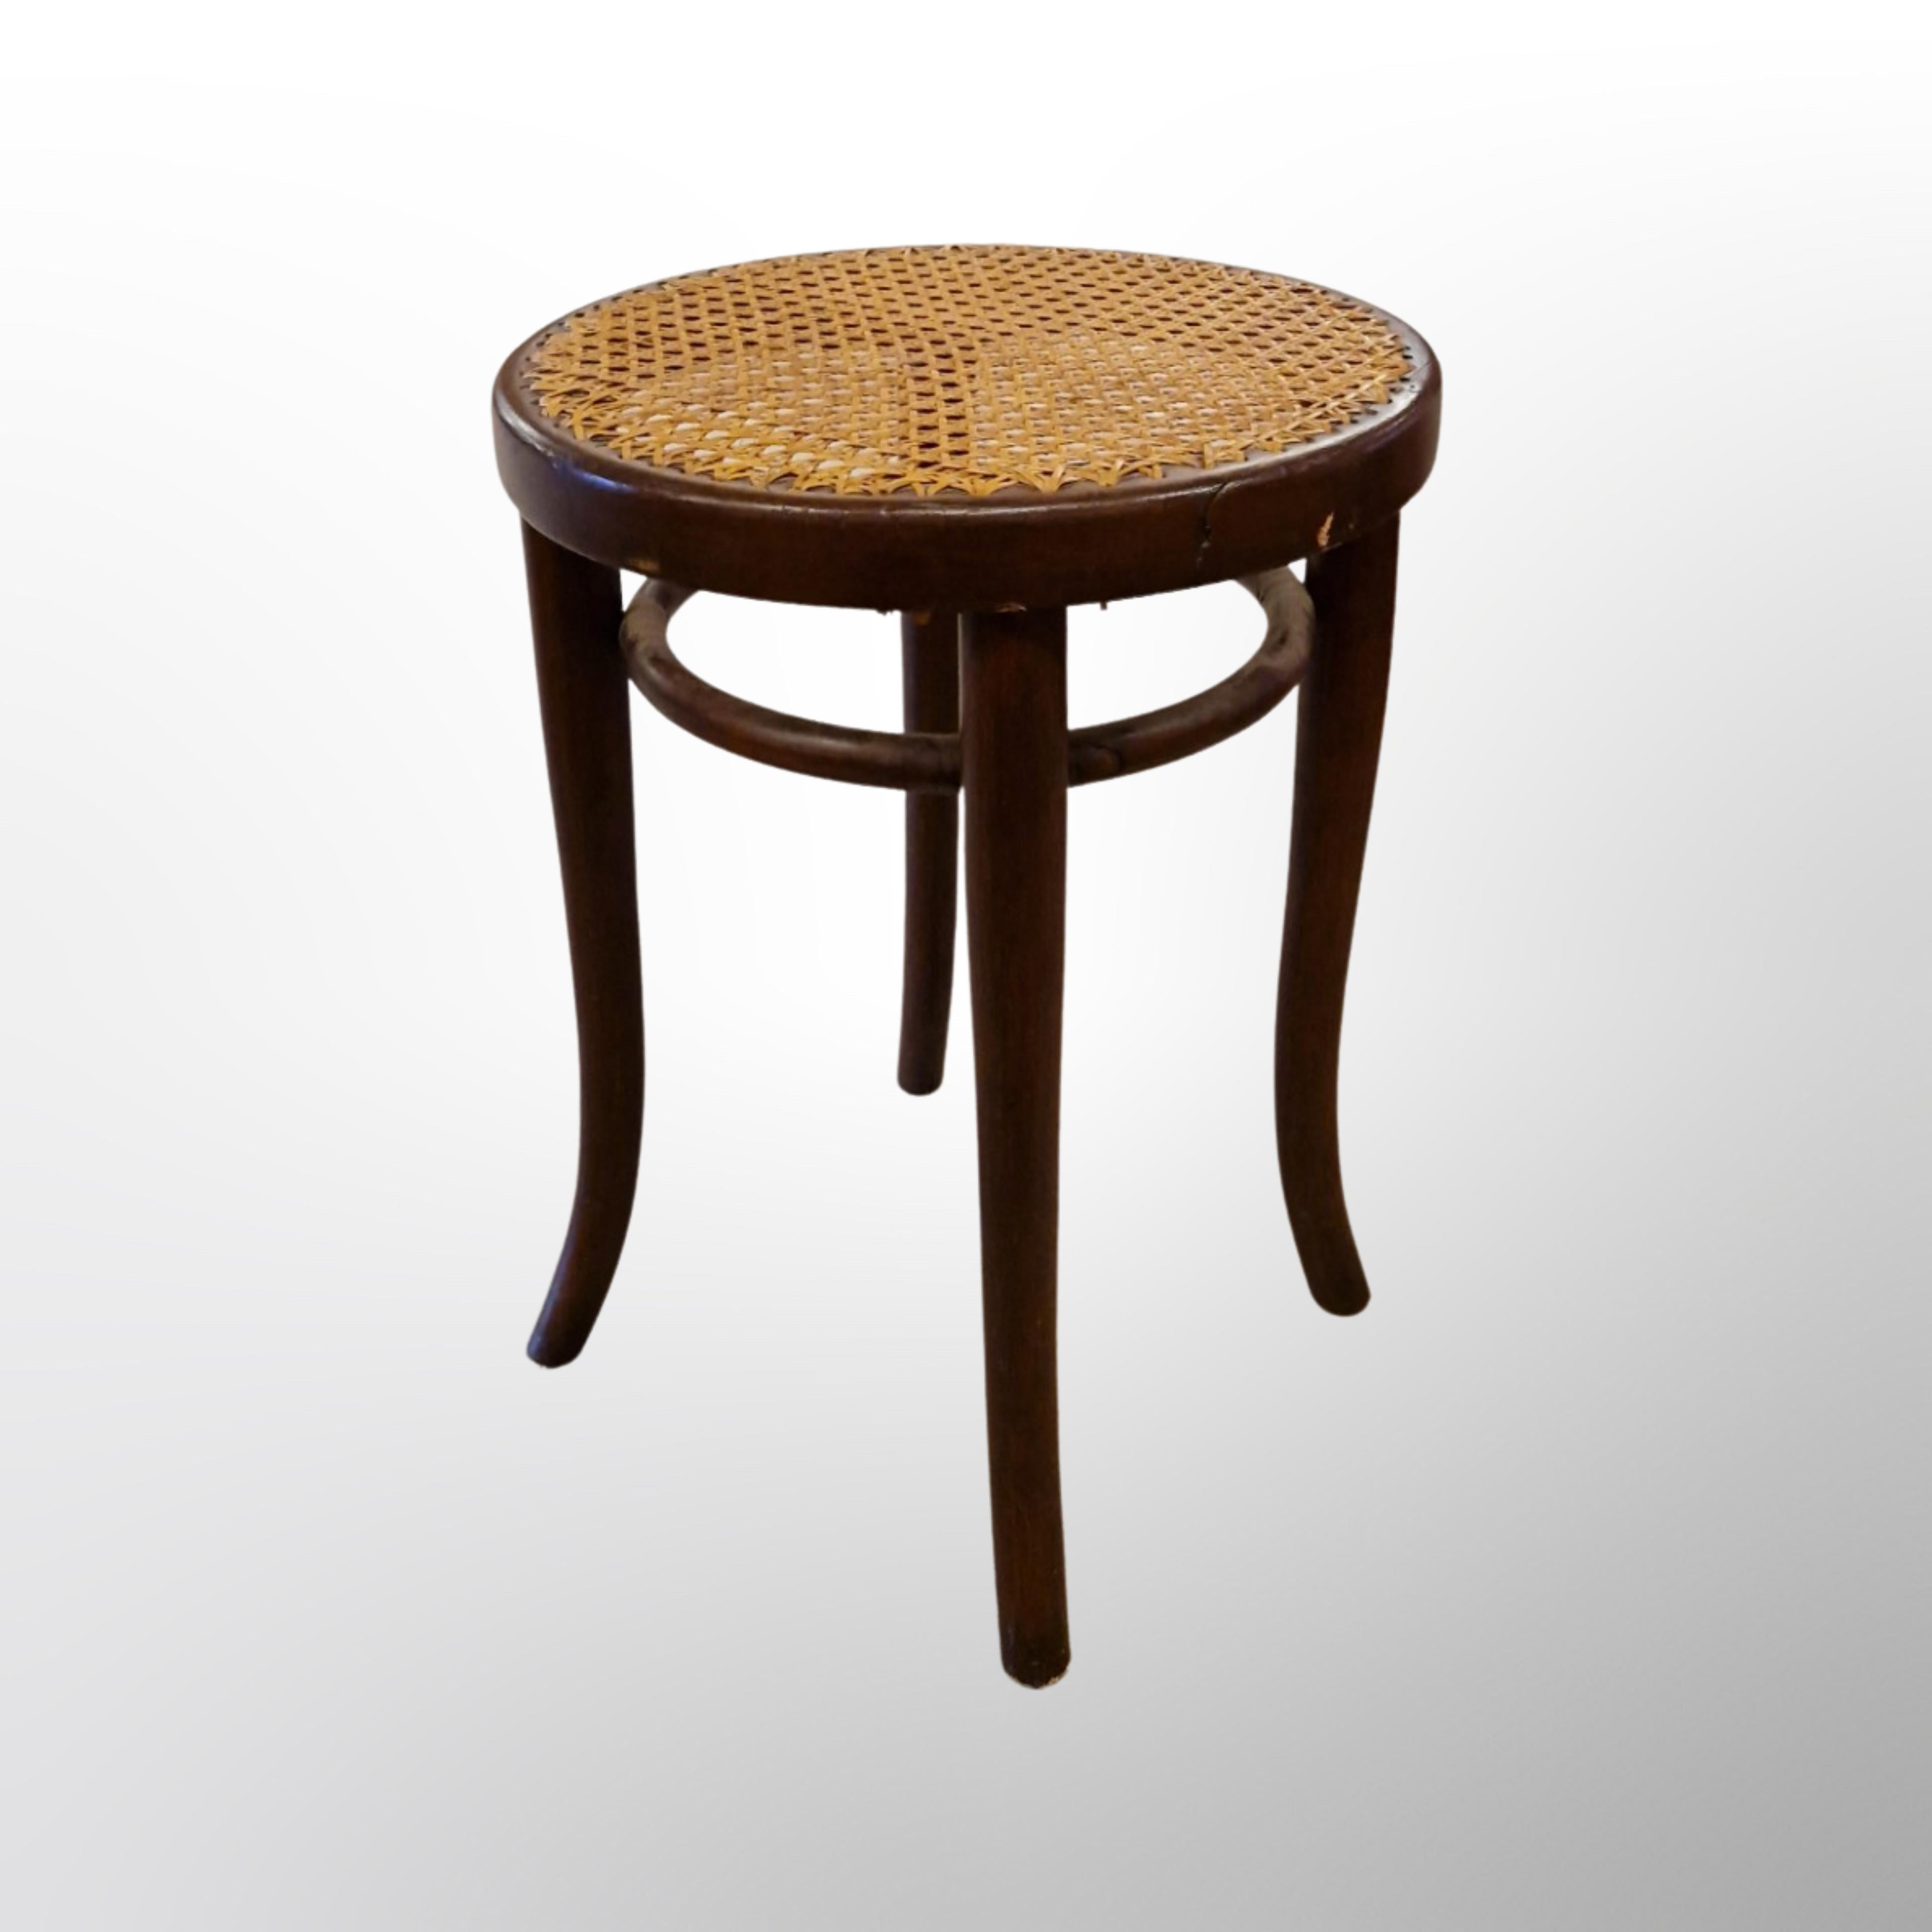 Original low stool. Made from bentwood and woven cane. Made by Thonet in the 1950s. Stamped with the Thonet name underneath. 